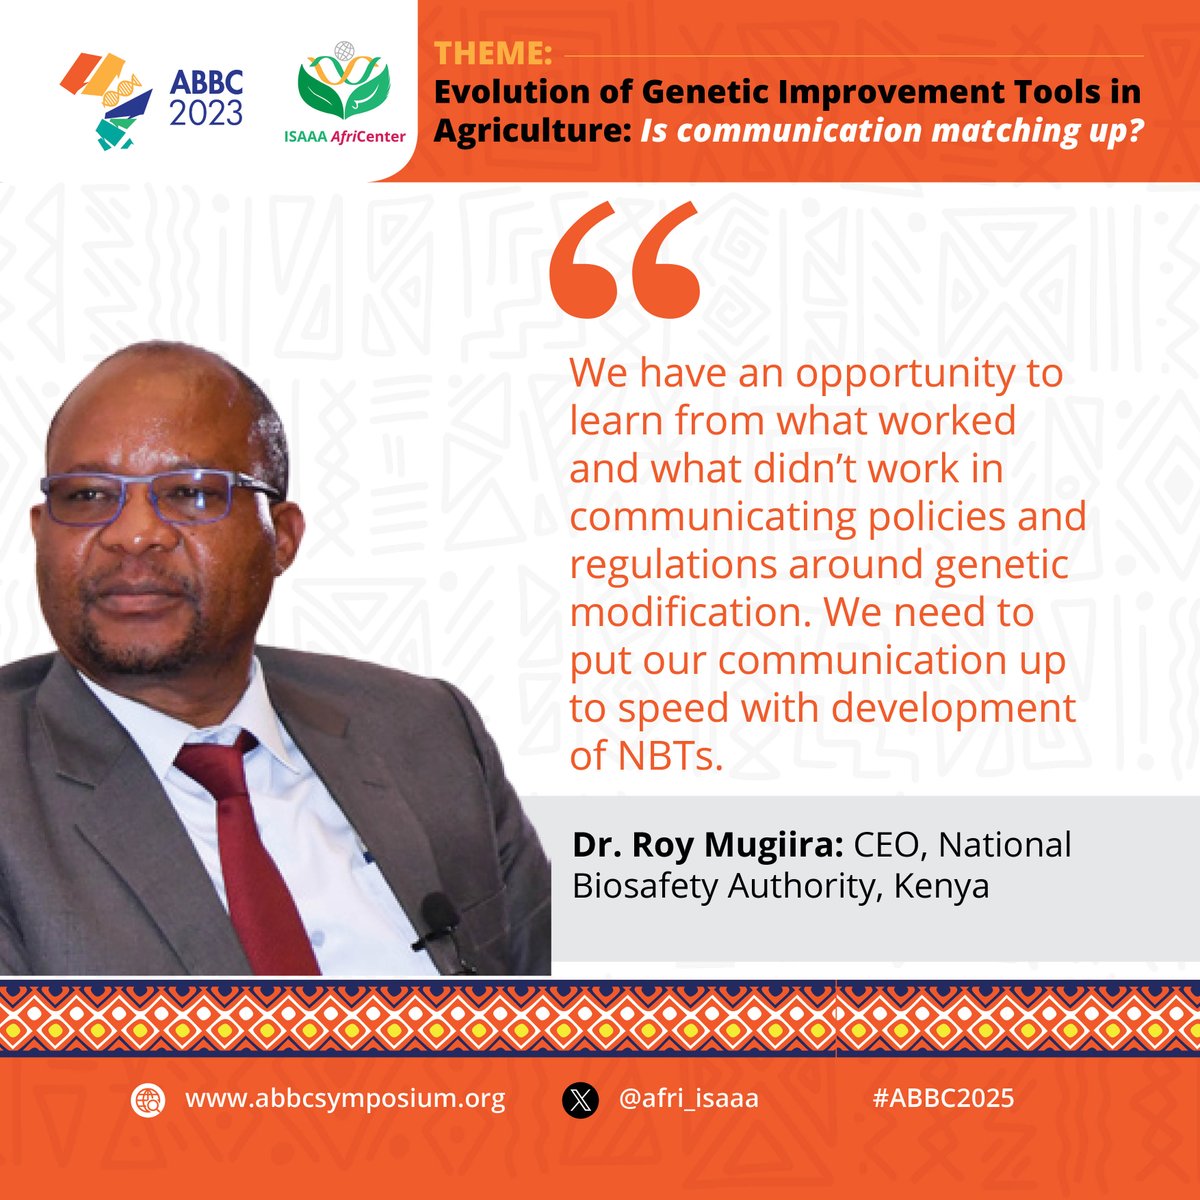 One of the main causes for resistance to uptake/adoption of agricultural biotechnology is the lack of proper understanding of policies and regulations that have been put in place, says Dr Roy Mugiira. Effective communication will address this issue. #ABBC #MyScienceStory #AfriSD